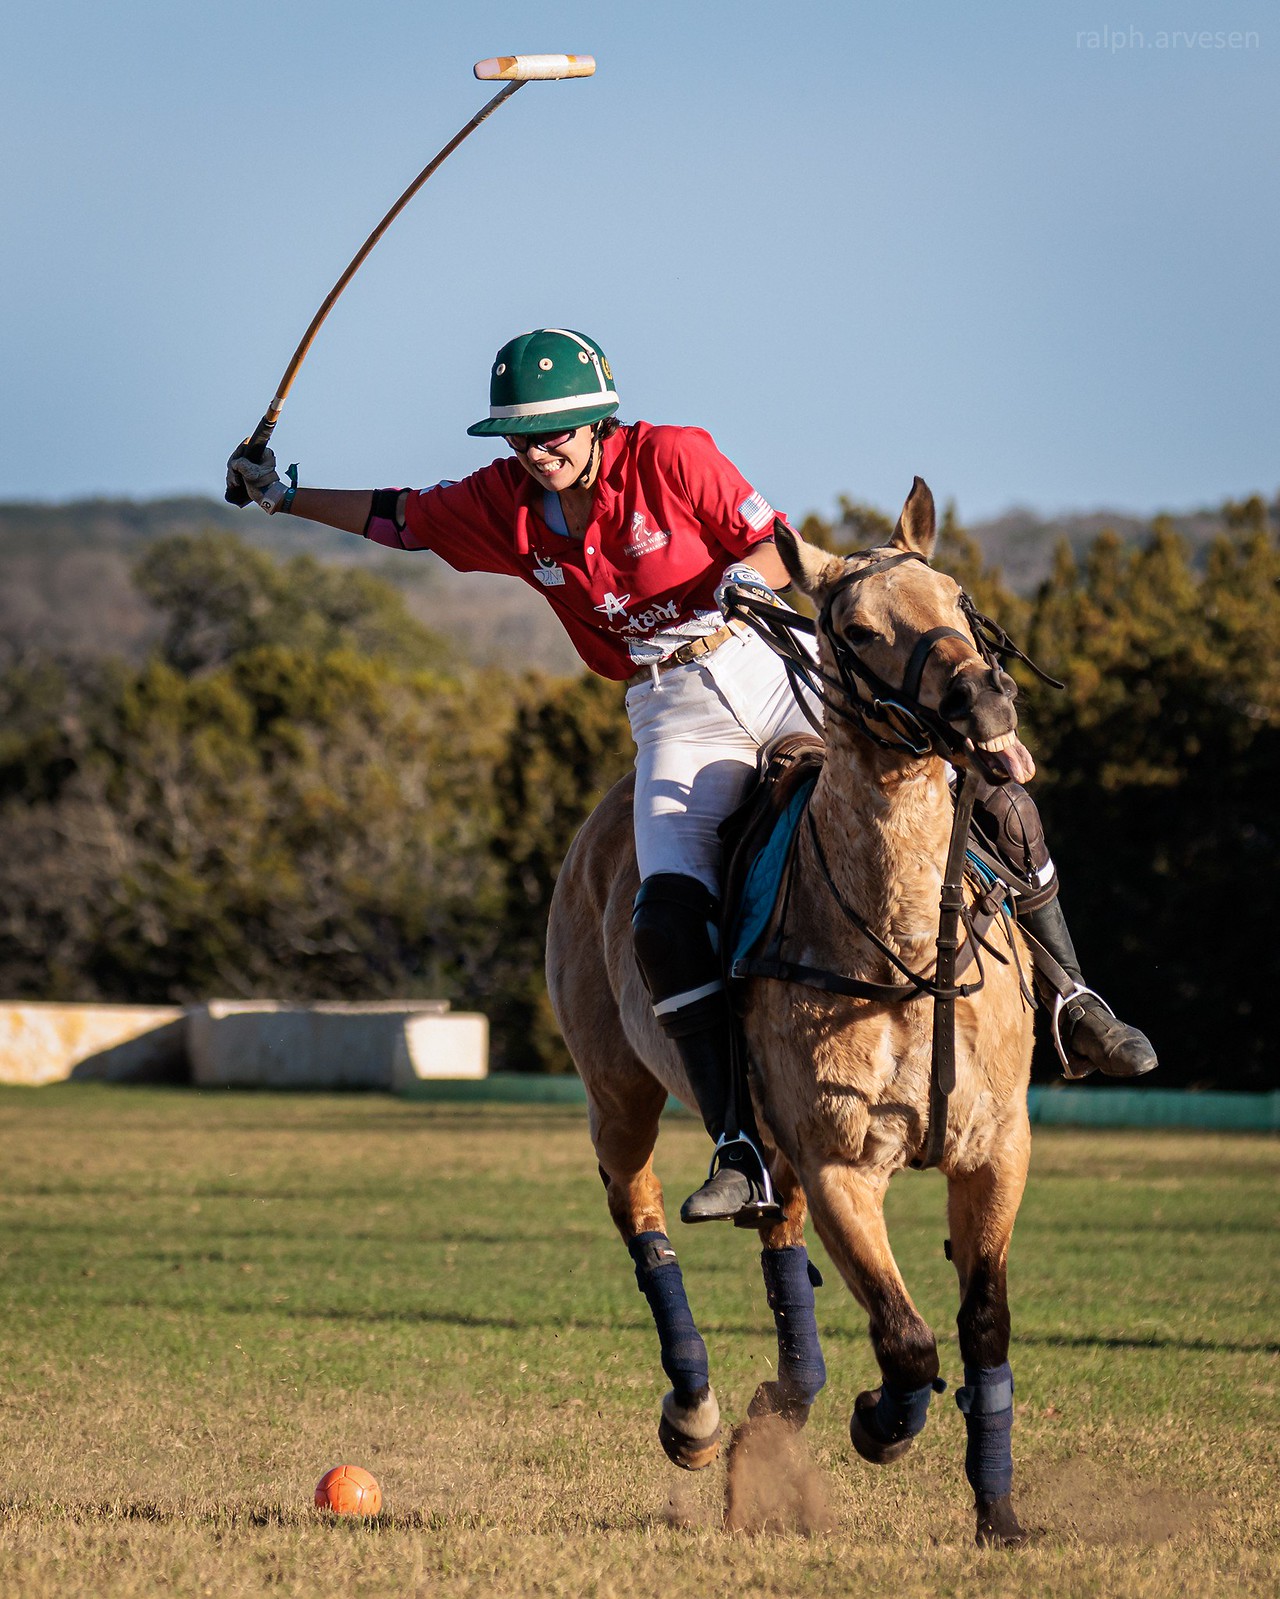 Victory Cup Polo | Texas Review | Ralph Arvesen